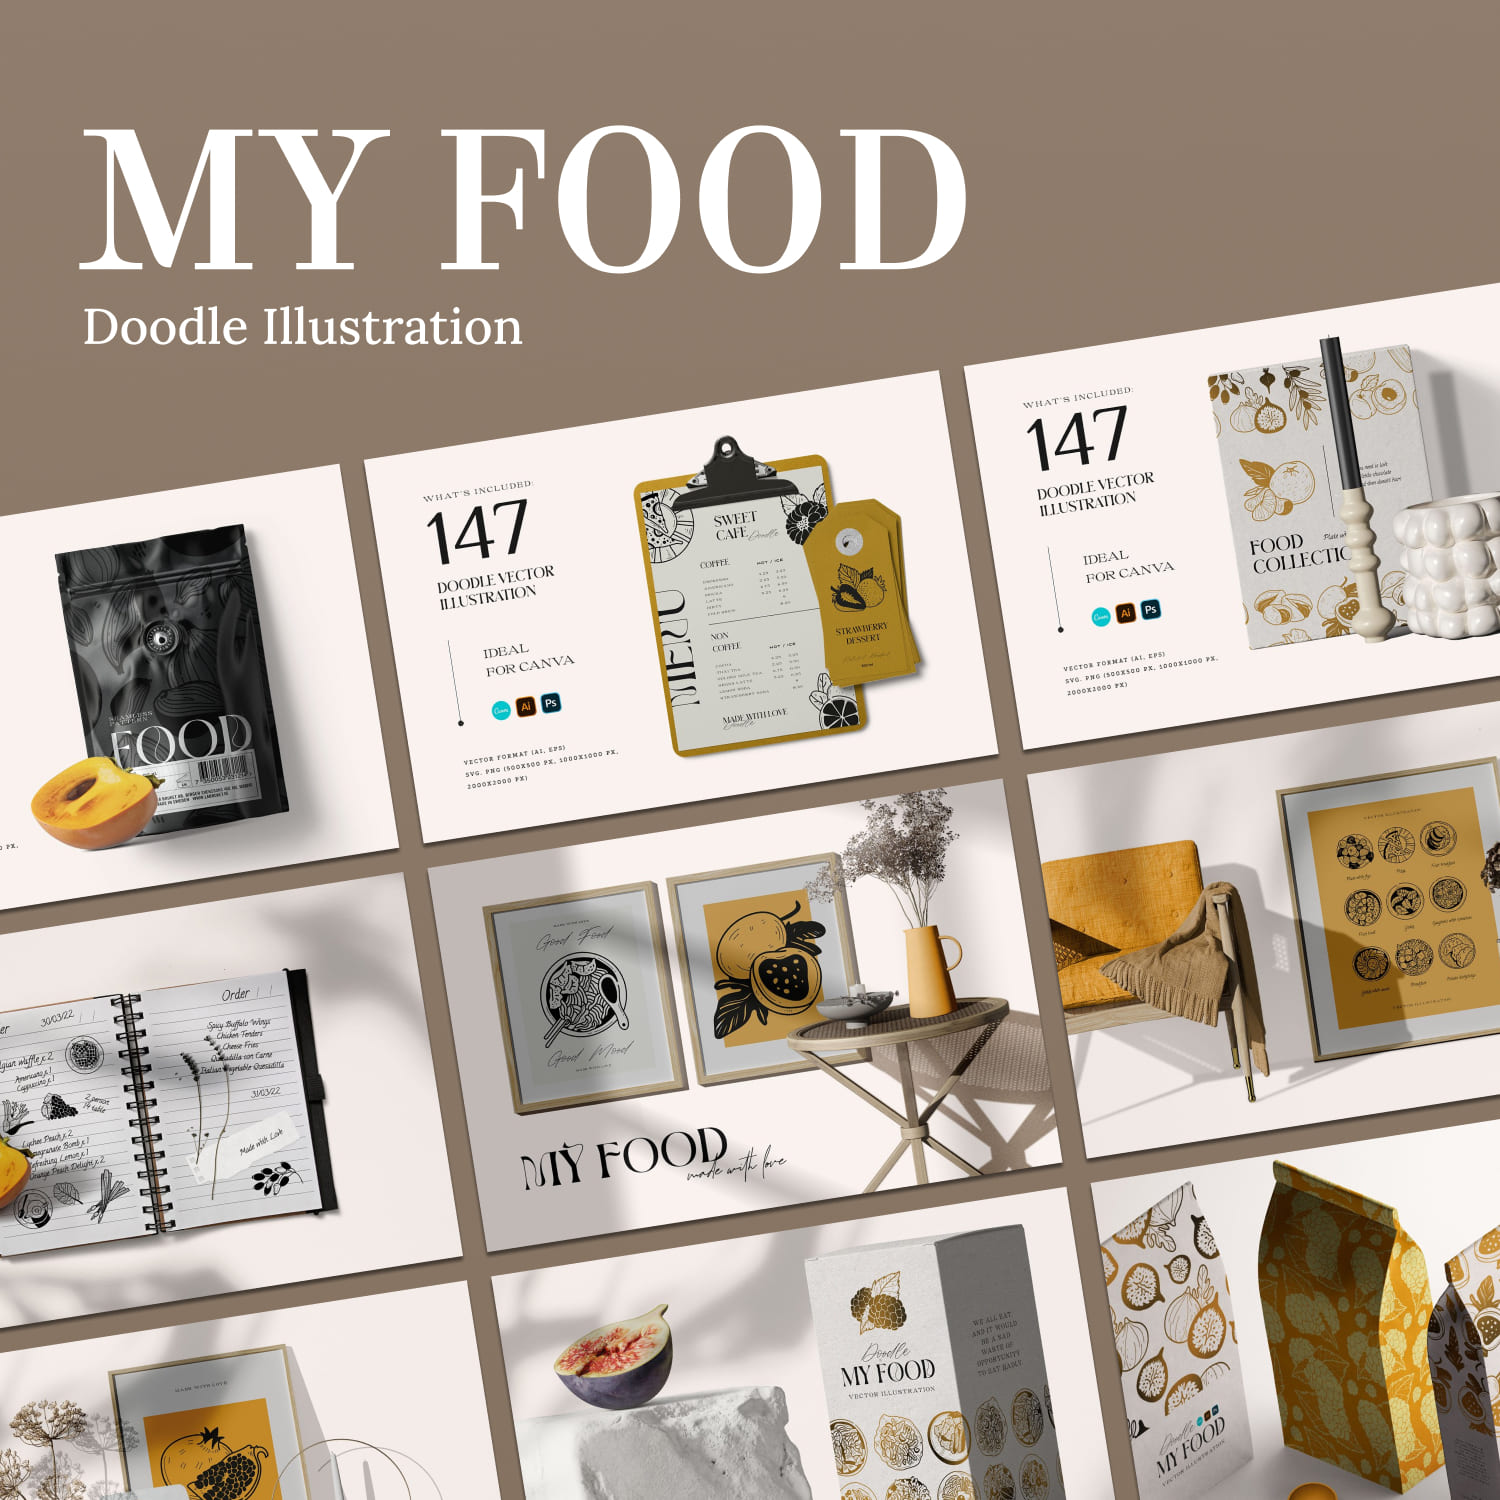 My food doodle illustration - main image preview.